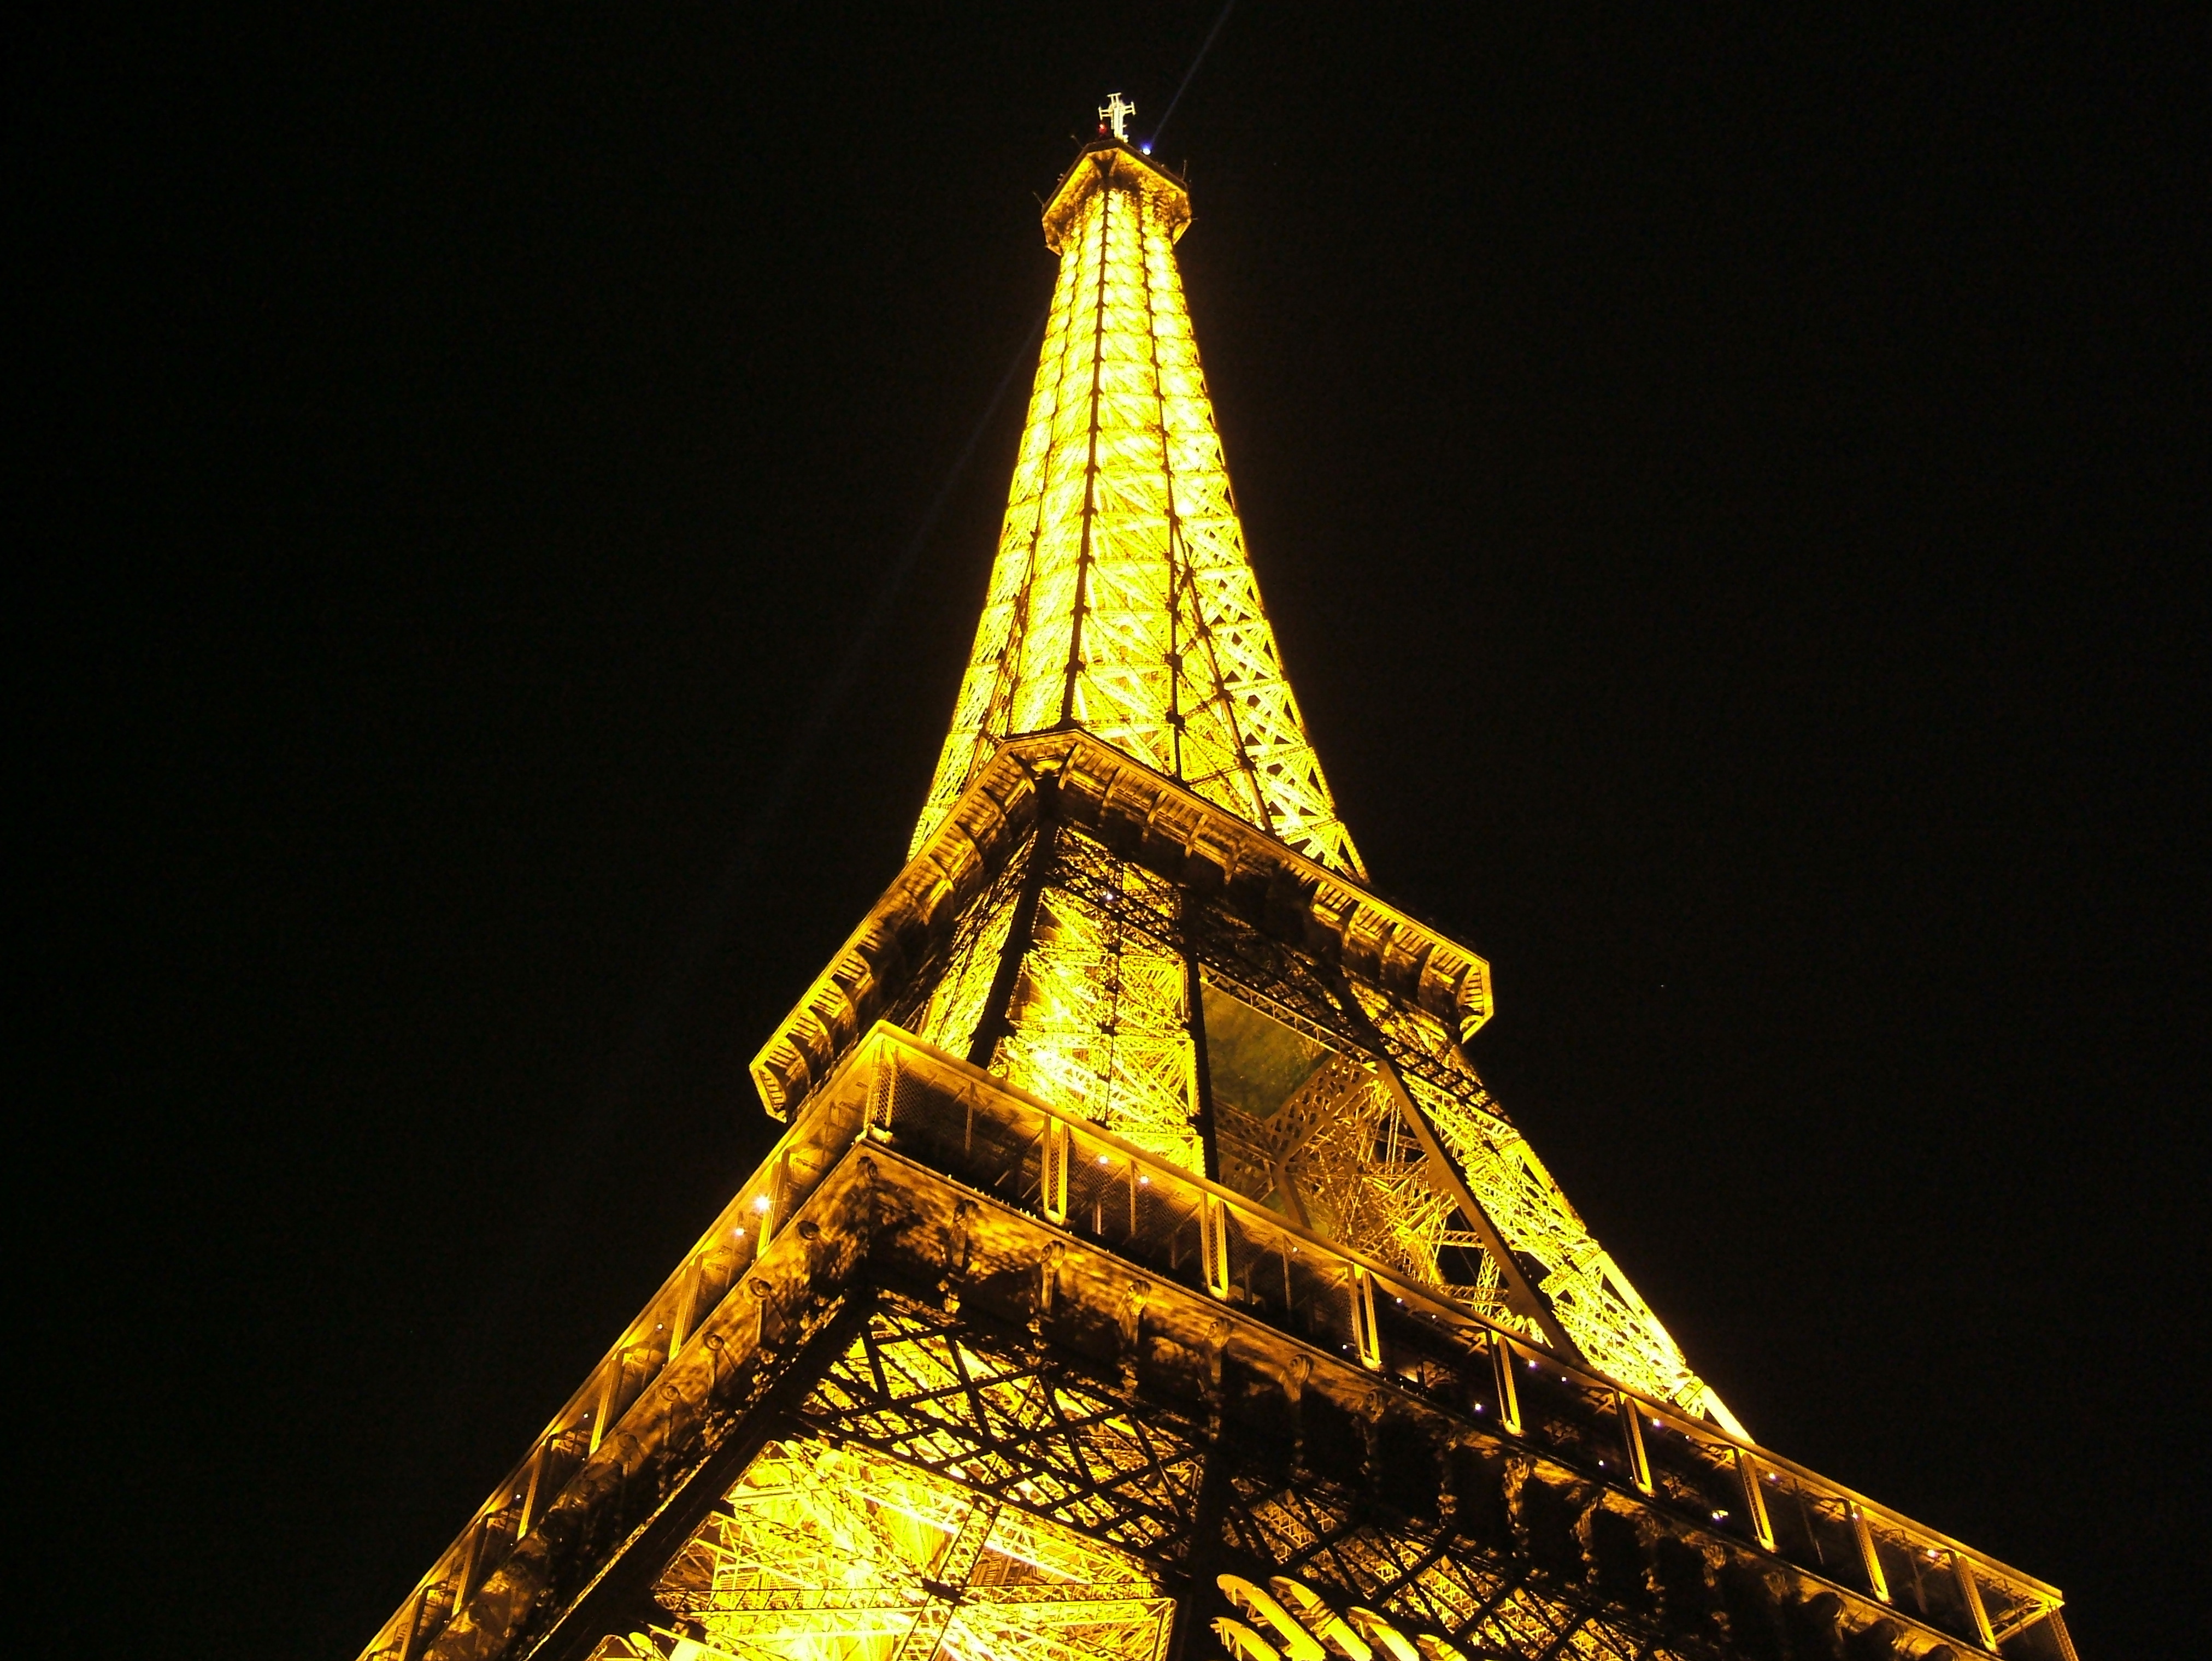 Eiffel Tower at night from Below